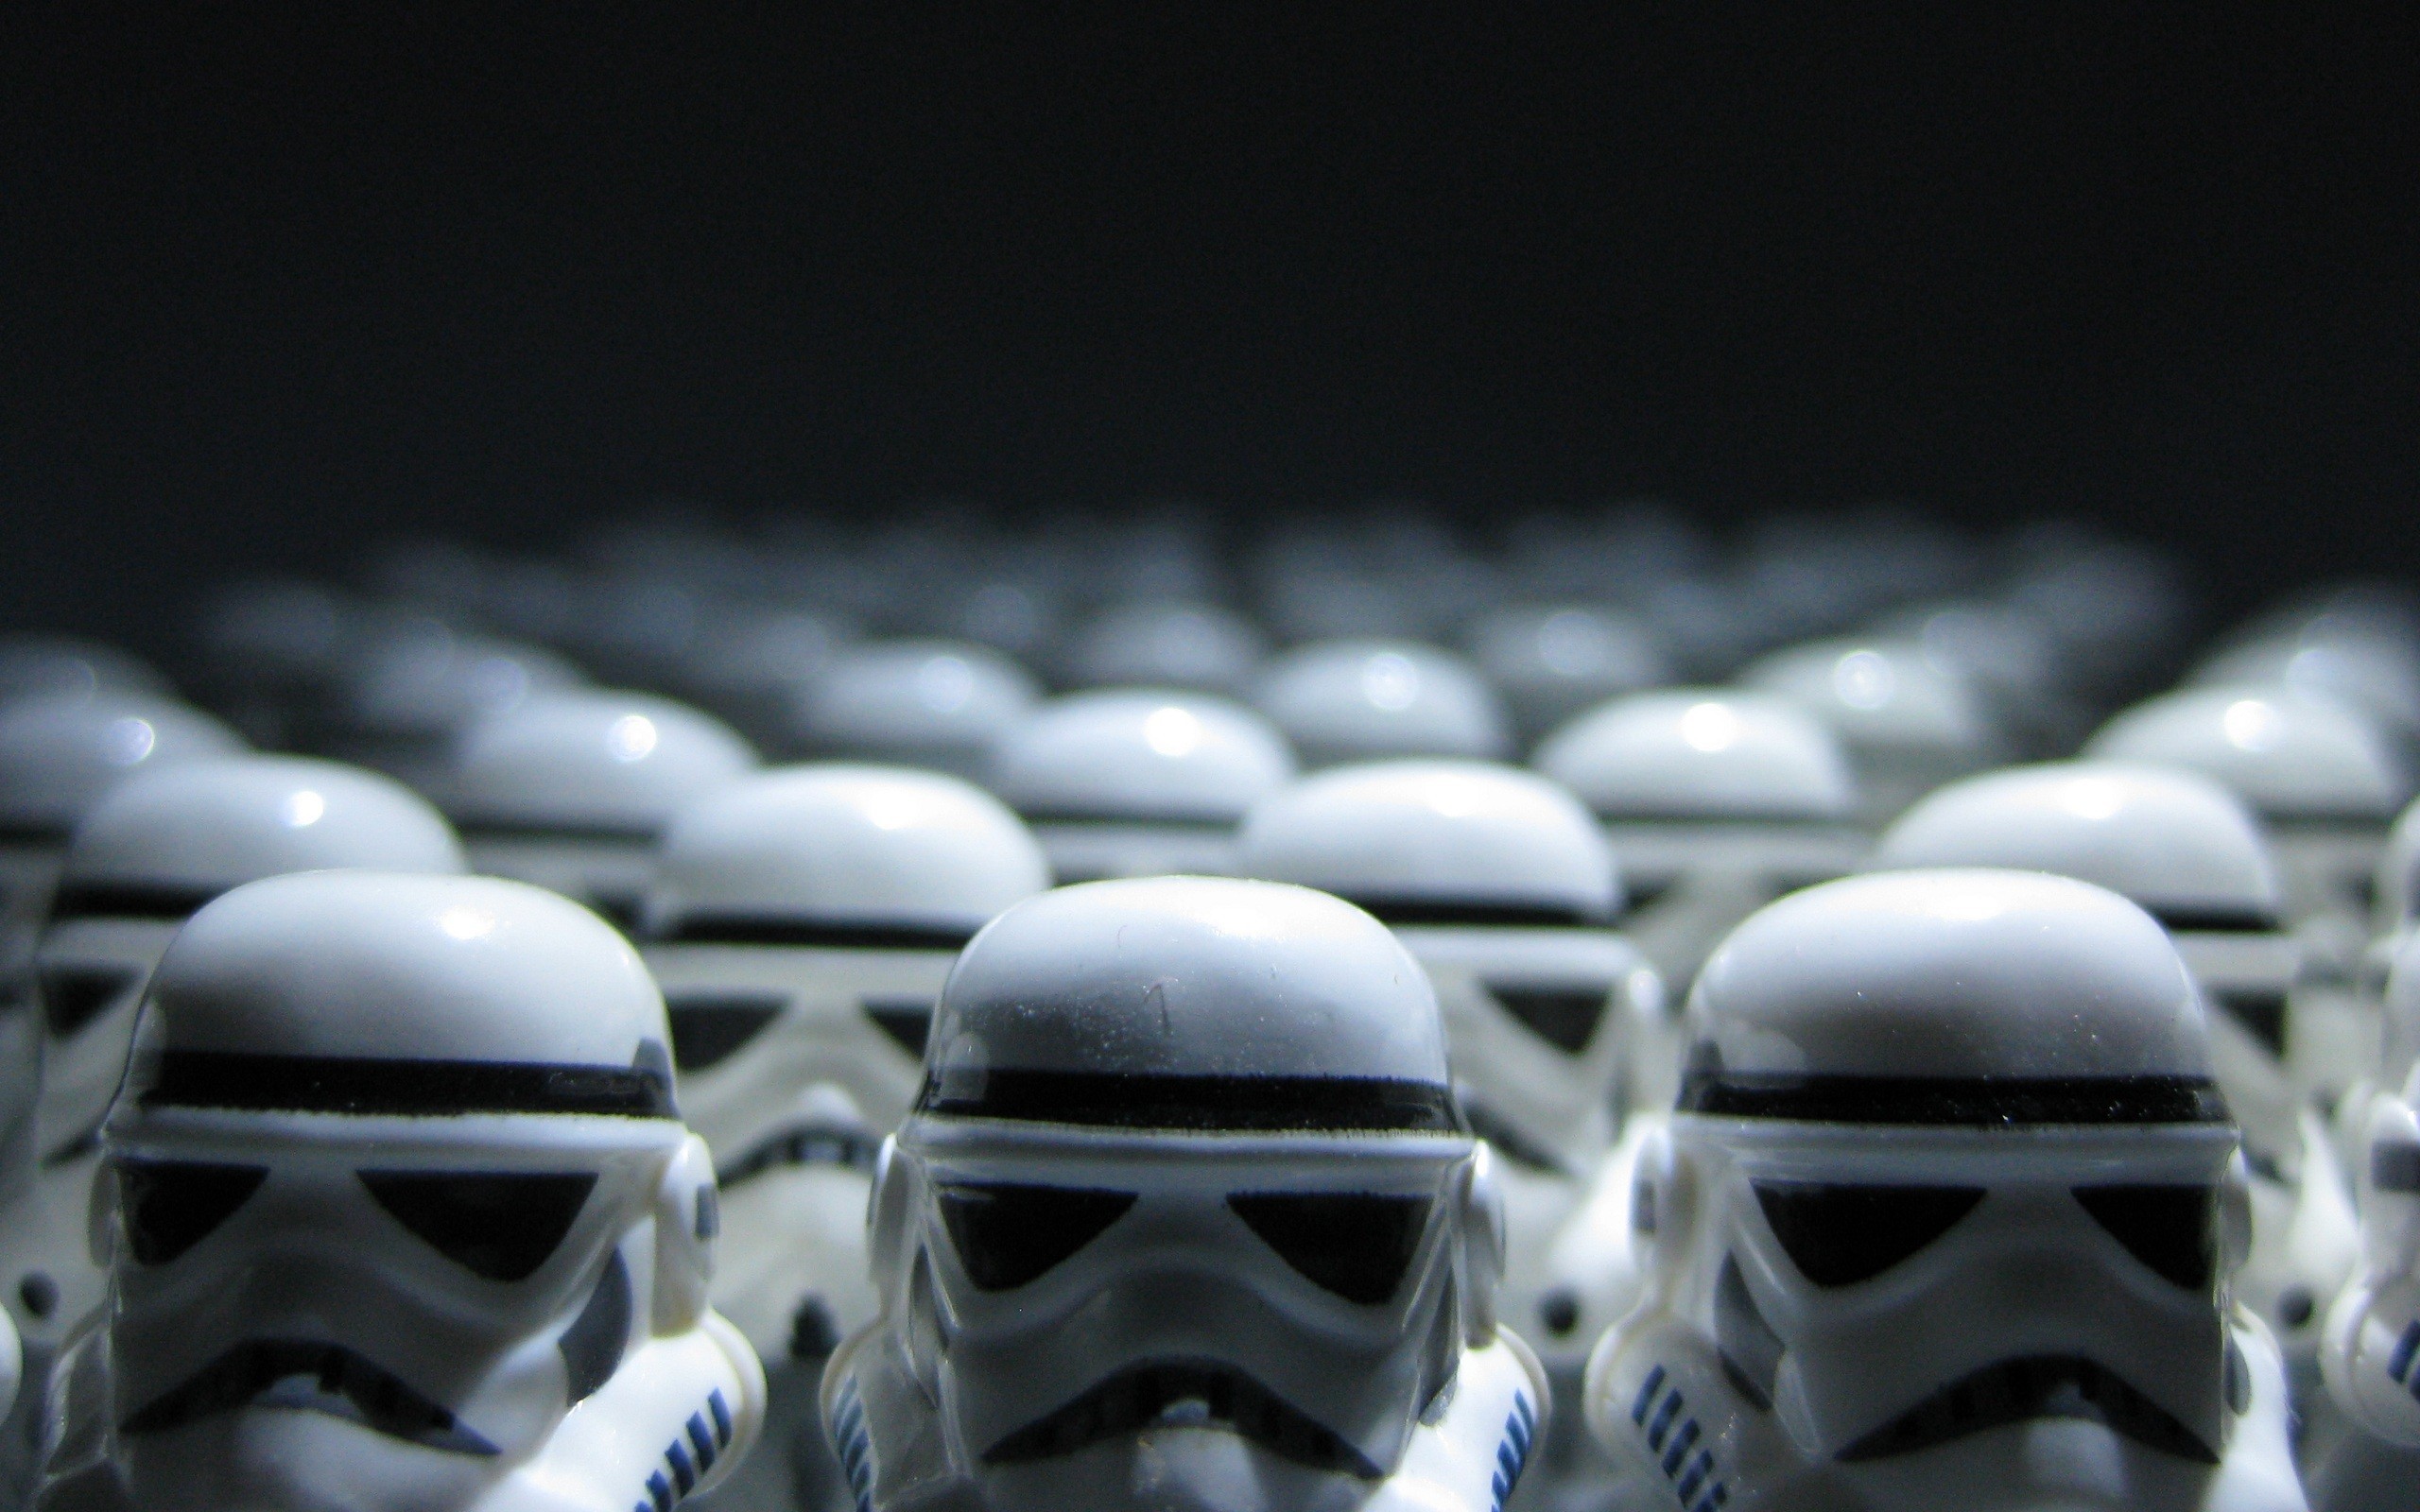 2560x1600 Lego Starwars Stormtroopers.... Awesome